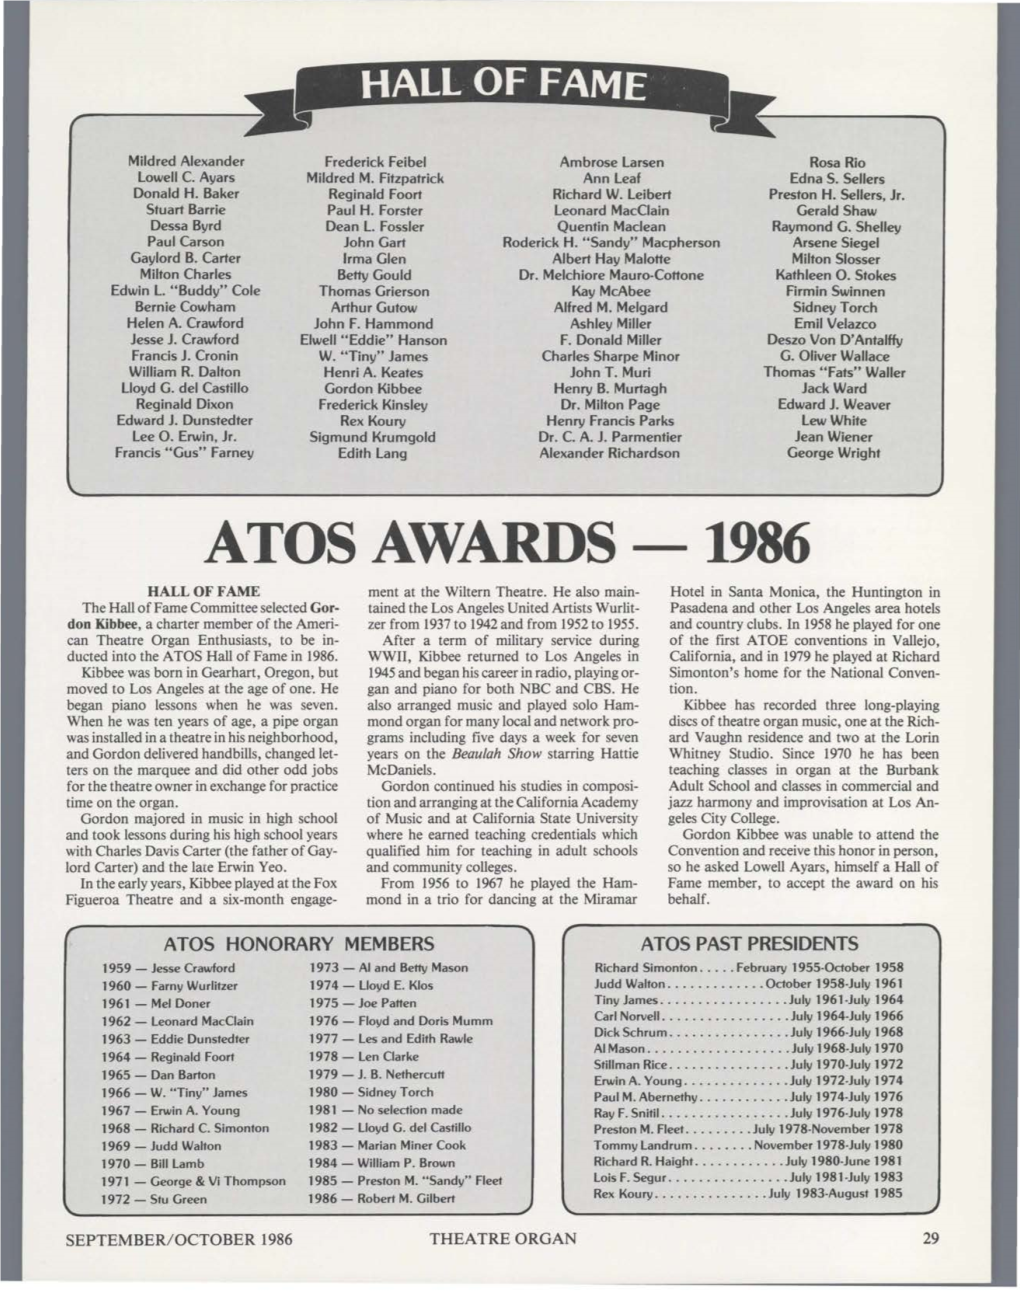 ATOS AWARDS 1986 HALL of FAME Ment at the Wiltern Theatre